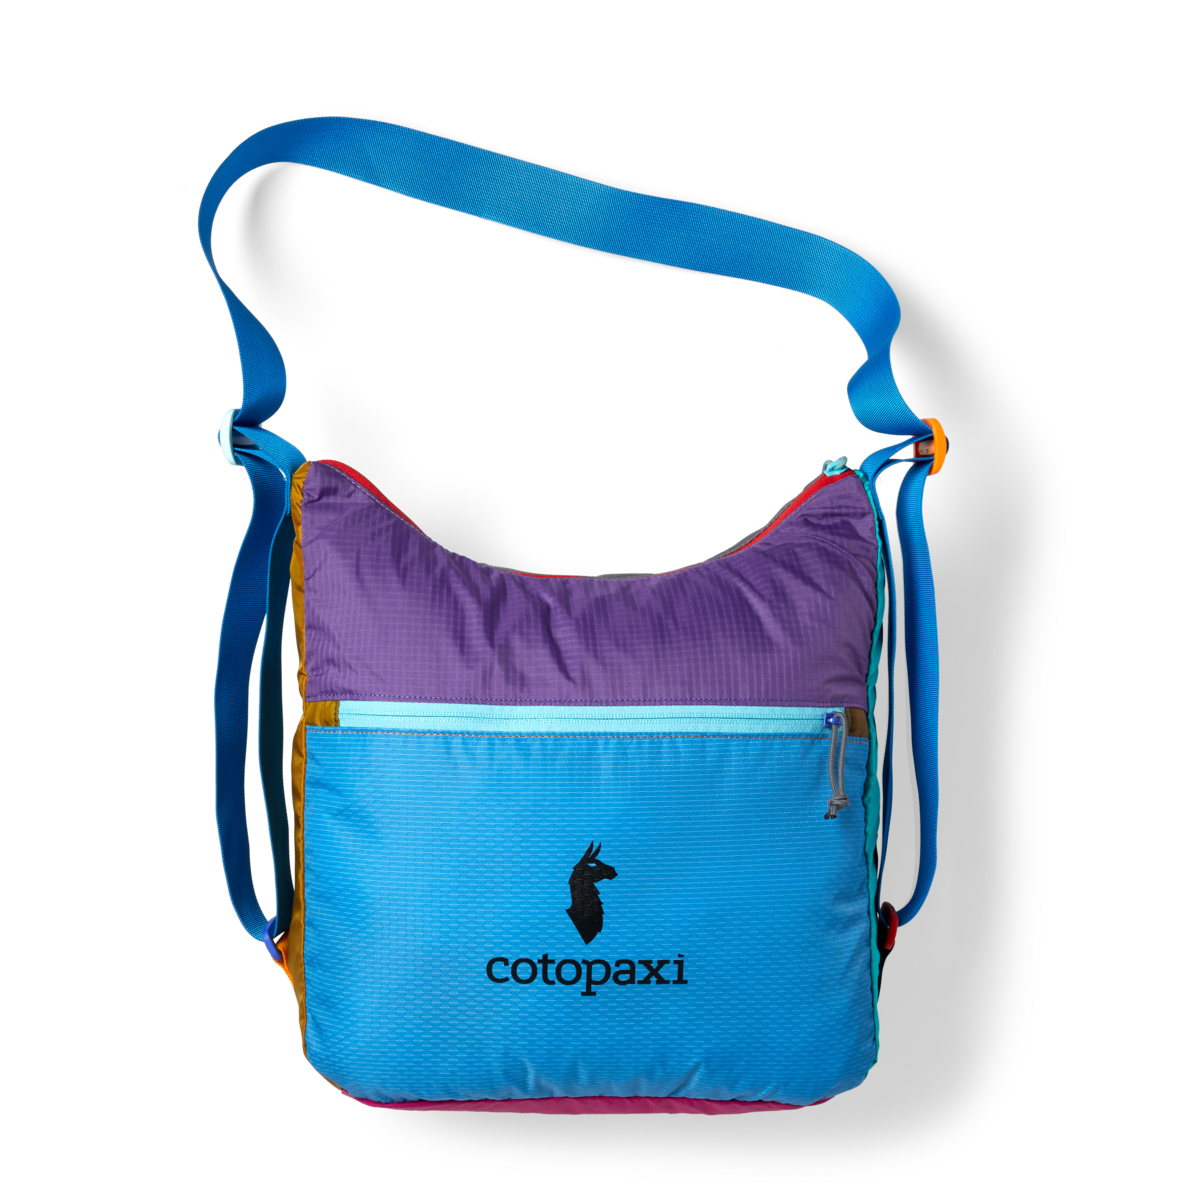 Cotopaxi Taal Convertible Tote Del Día Surprise Pack